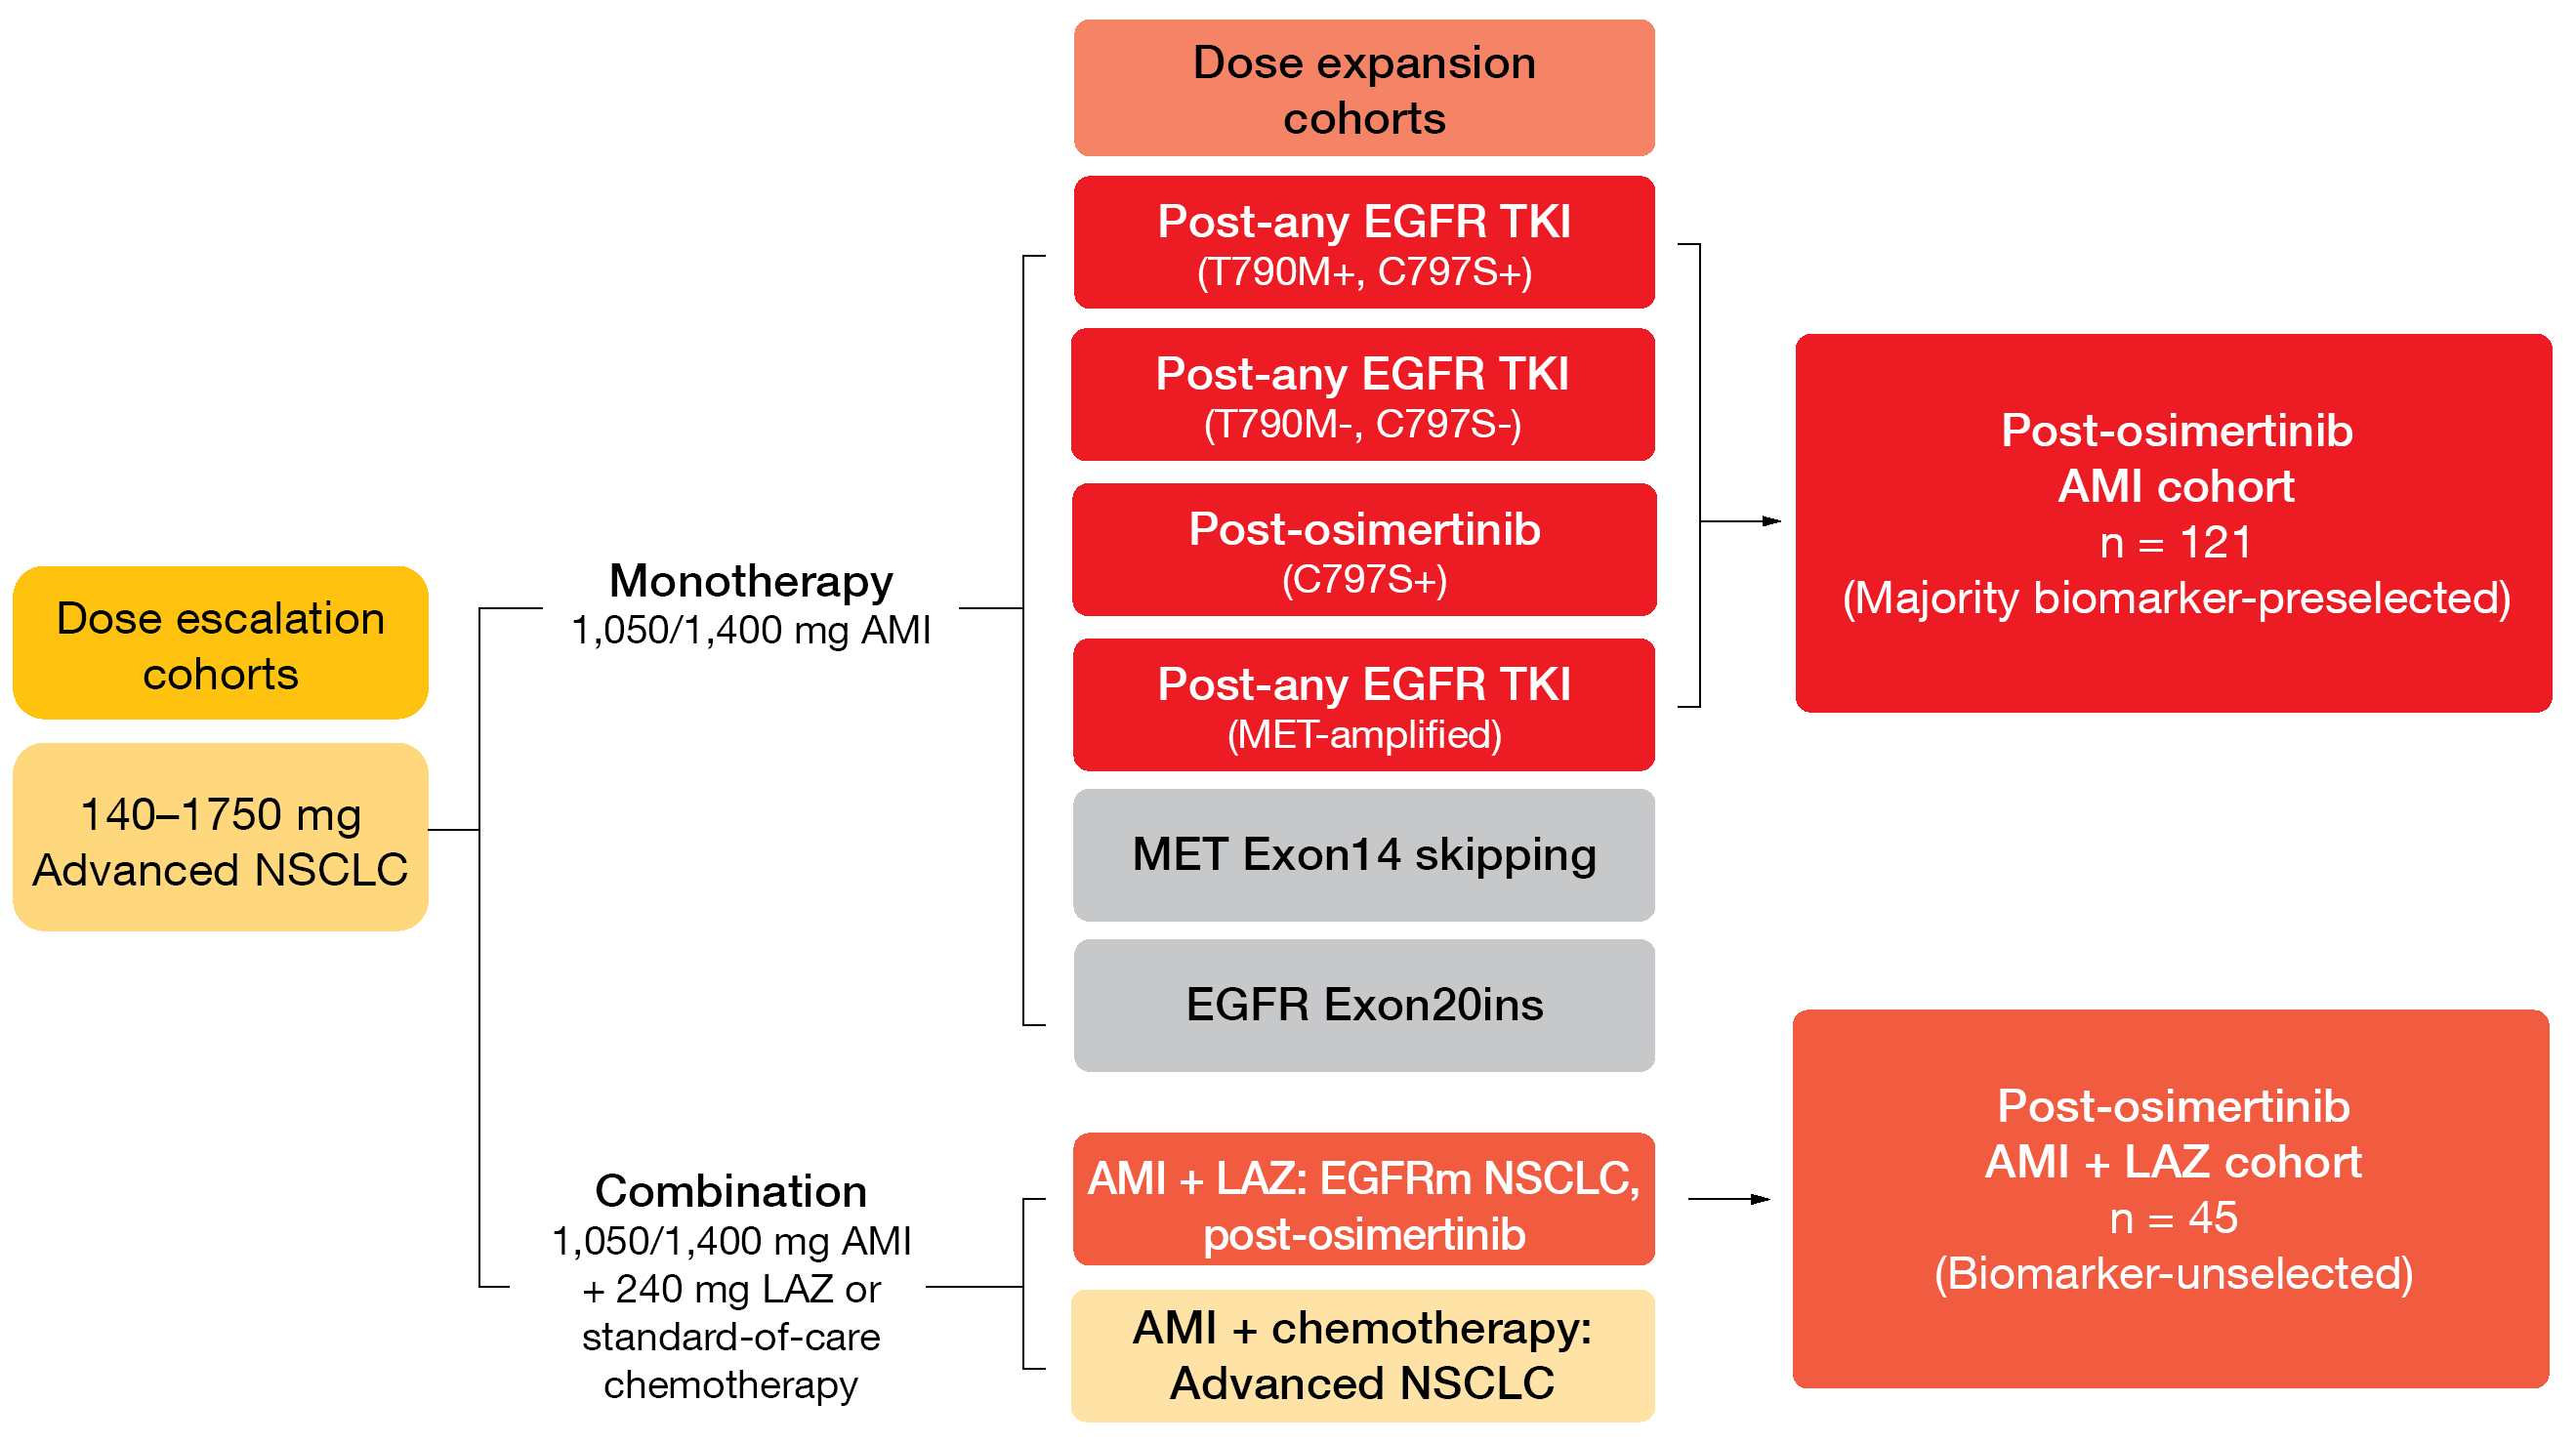 Figure 3: Design of the CHRYSALIS trial investigating amivantamab (AMI) alone and in combination with lazertinib (LAZ)